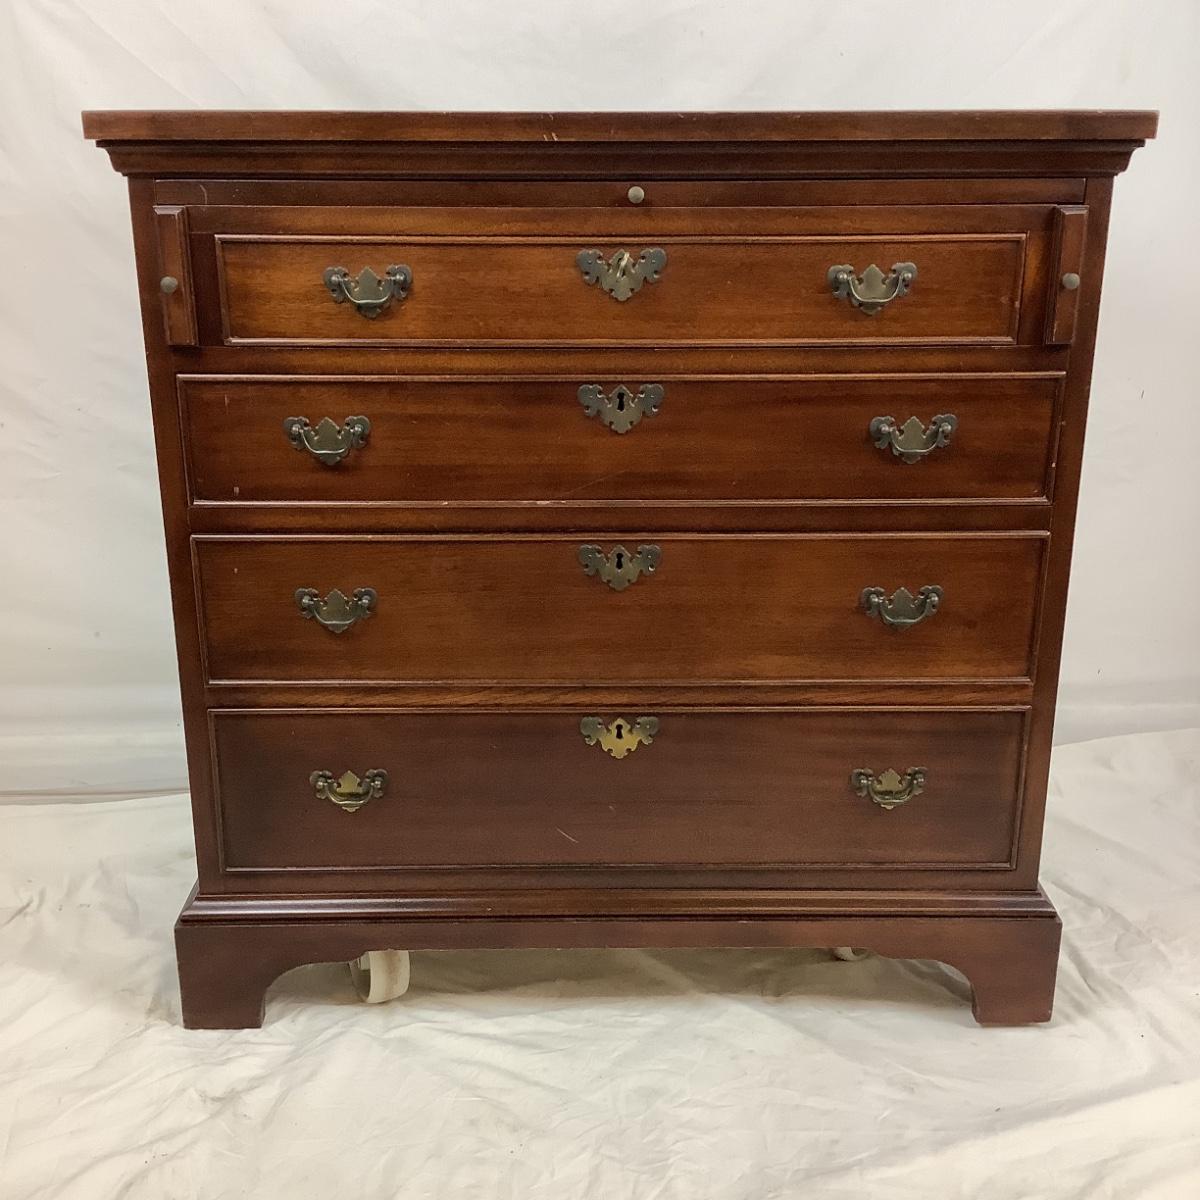 Lot 6075. Vintage Mahogany Craftique Bachelors Chest/Nightstand ...